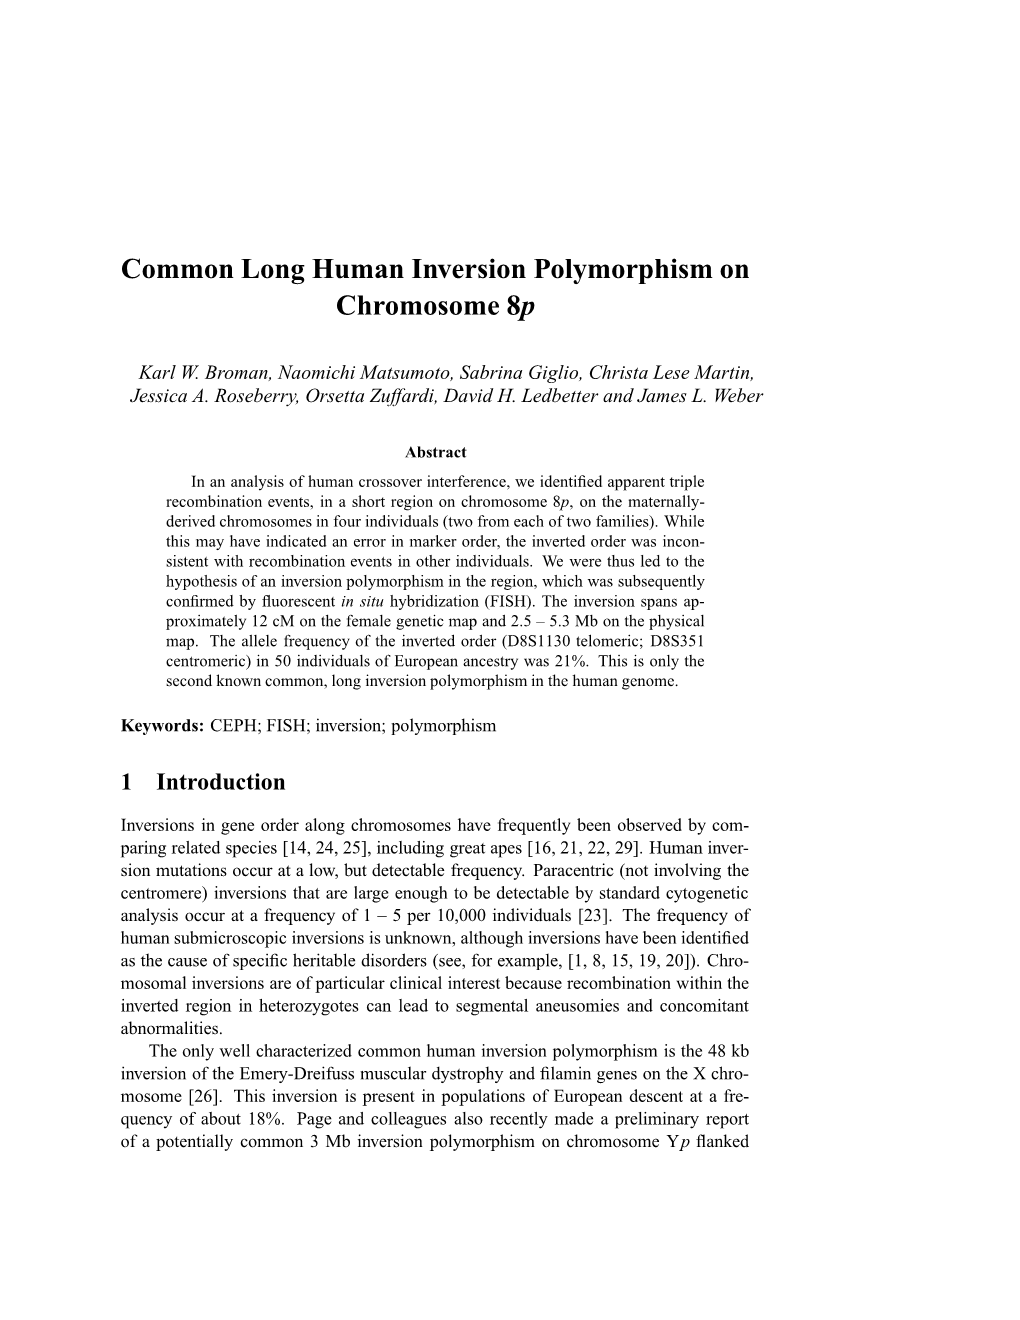 Common Long Human Inversion Polymorphism on Chromosome 8P